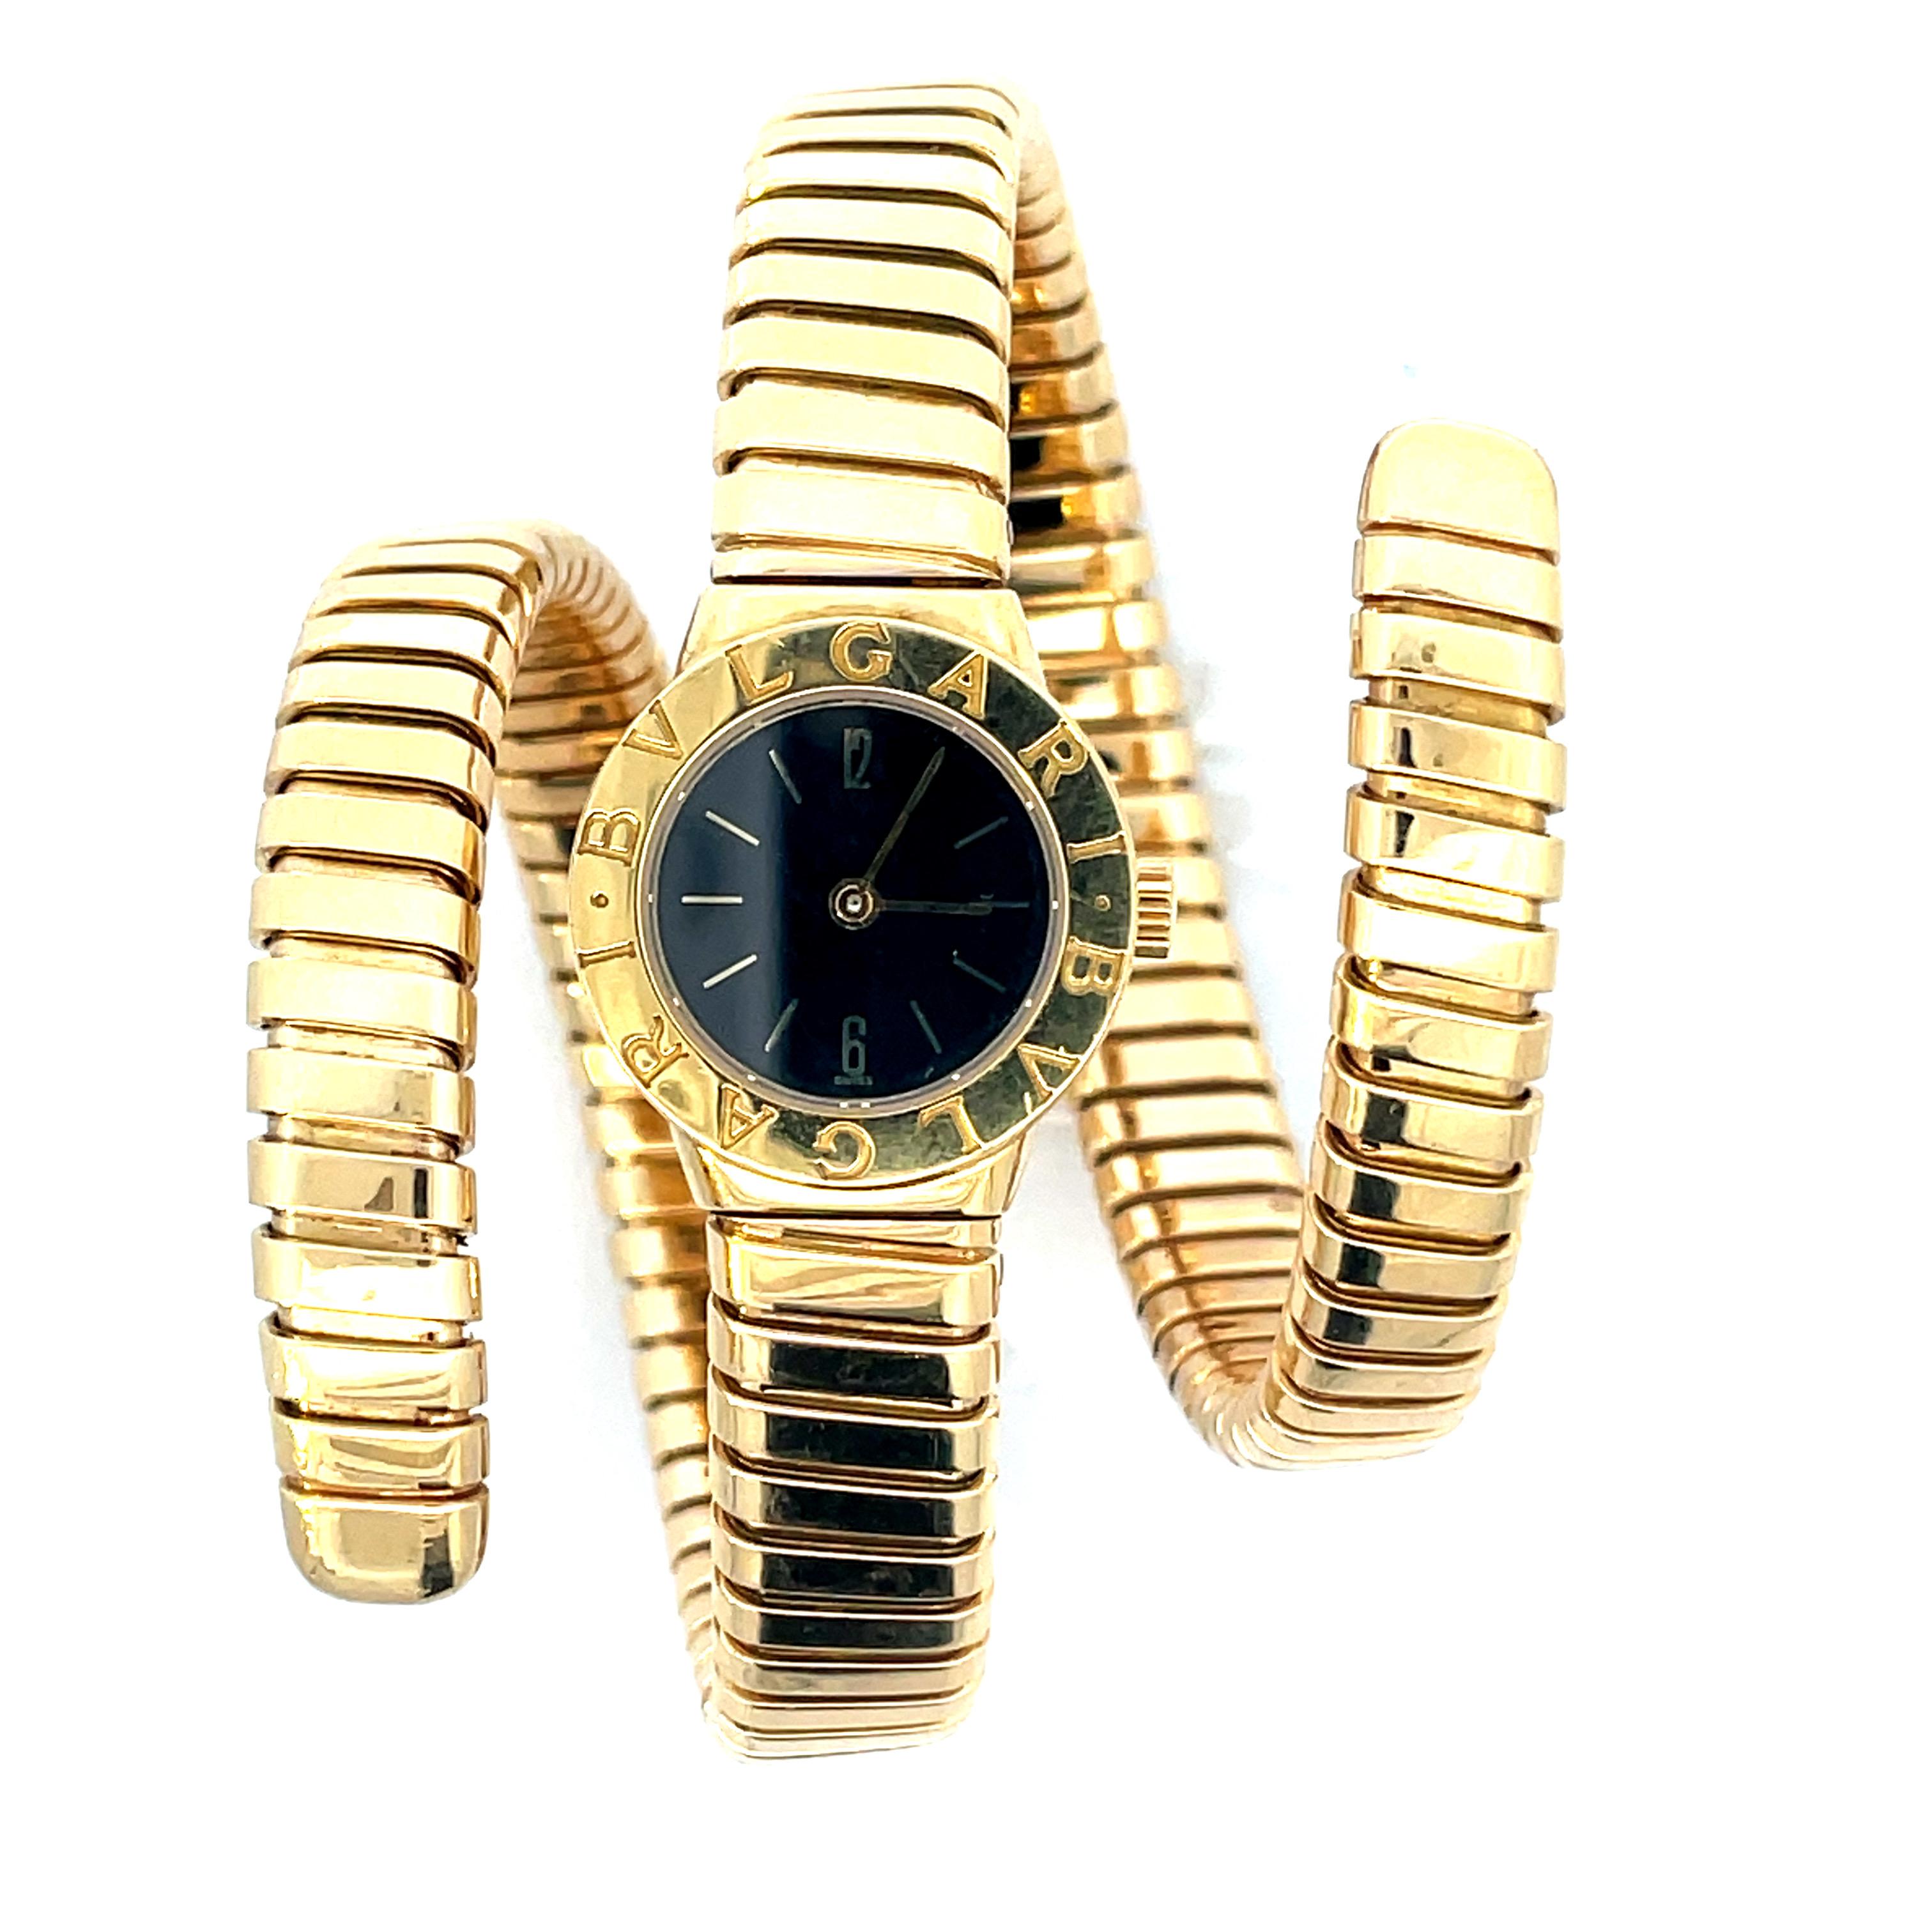 Bulgari Tubogas lady's snake bracelet watch in 18kt yellow gold featuring a stunning and rare central movement watch. This  Automatic movement watch has a round head and black dial. An iconic watch you will wear forever. Circa mid-1980s
The watch